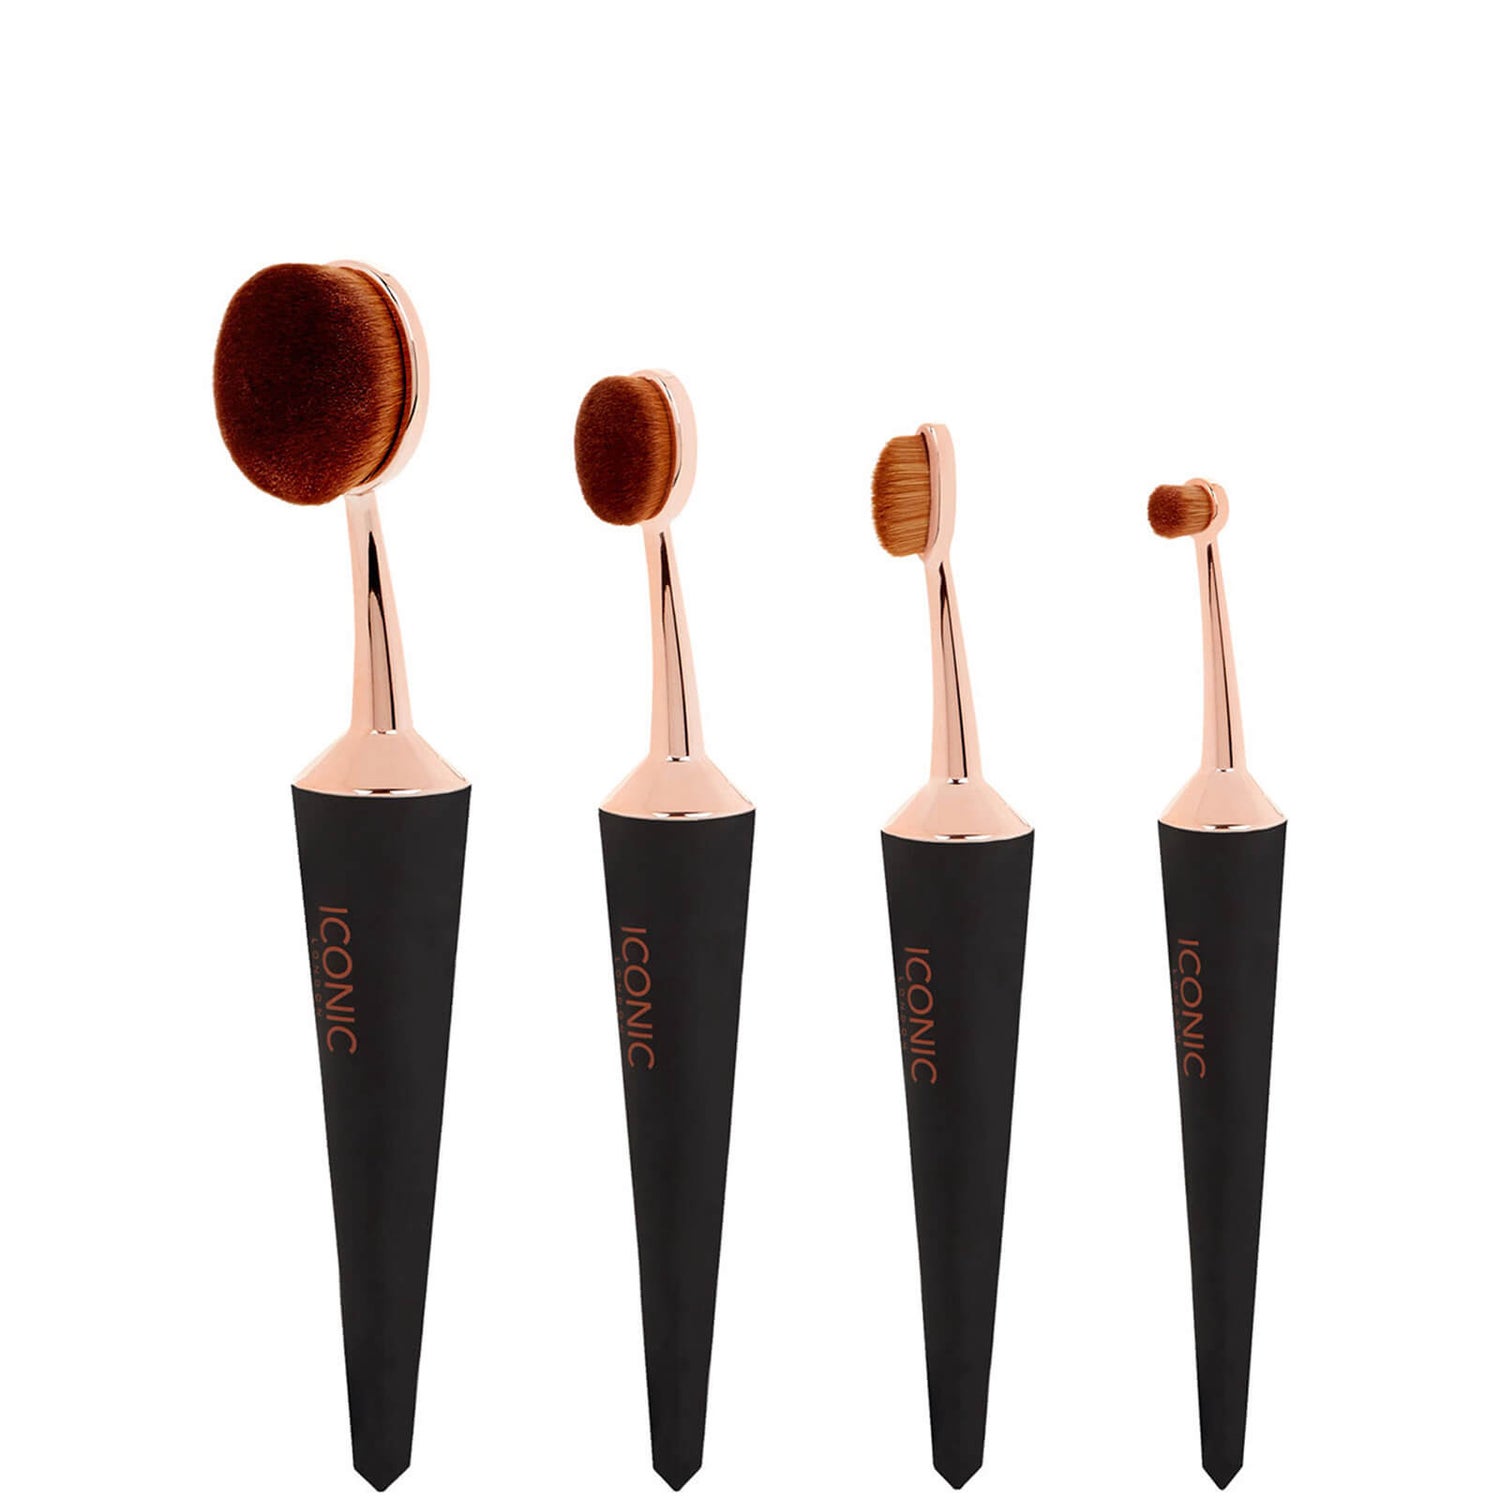 ICONIC LONDON Evo Contour and Conceal Brush Set